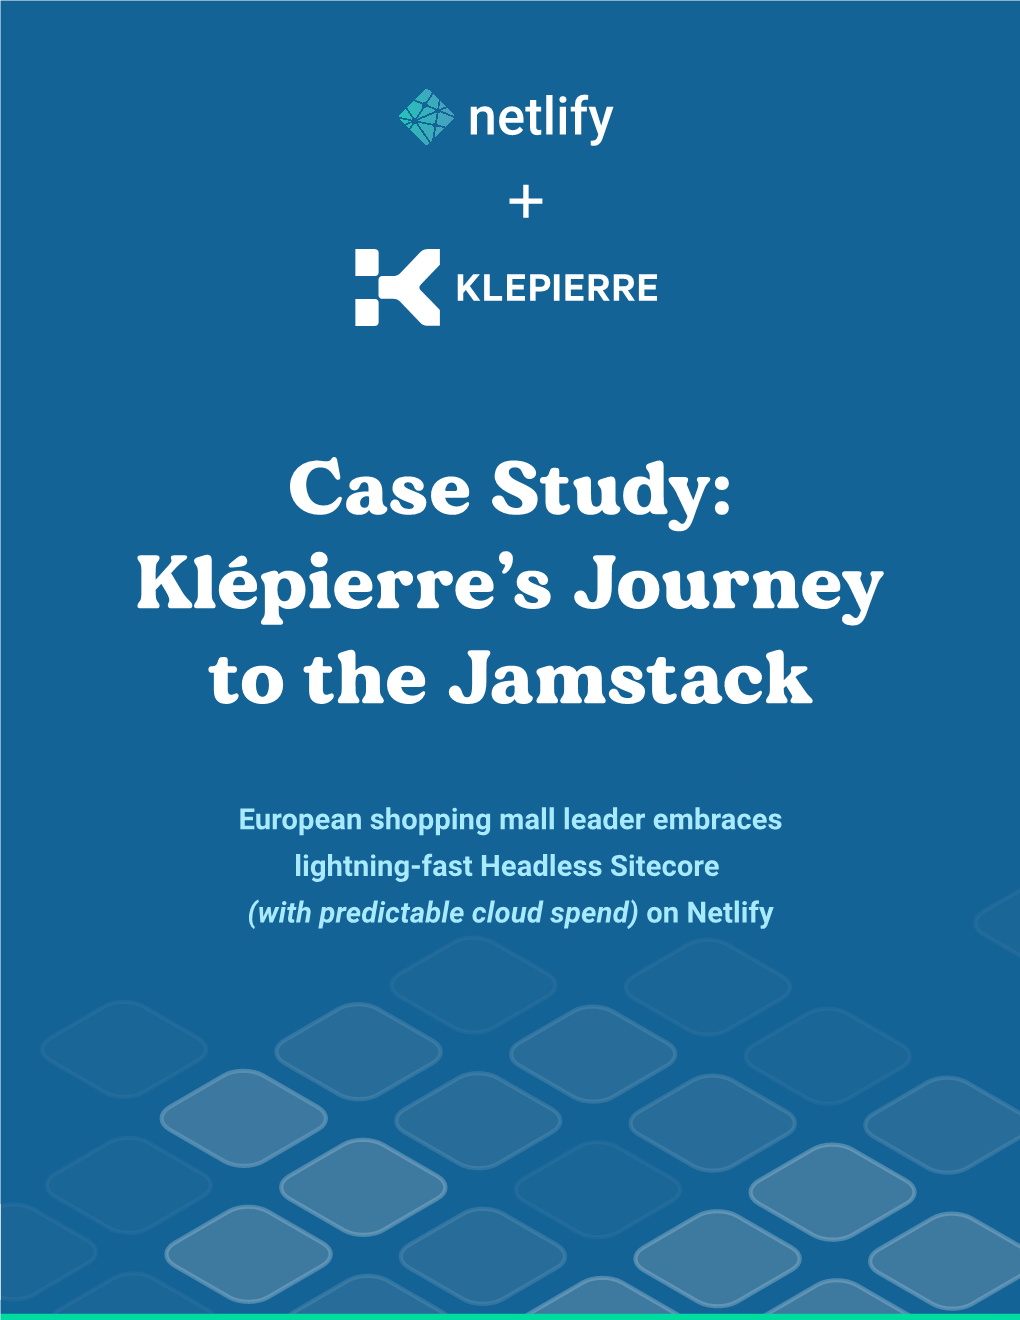 European Shopping Mall Leader Embraces Lightning-Fast Headless Sitecore (With Predictable Cloud Spend) on Netlify Klepierre Case Study